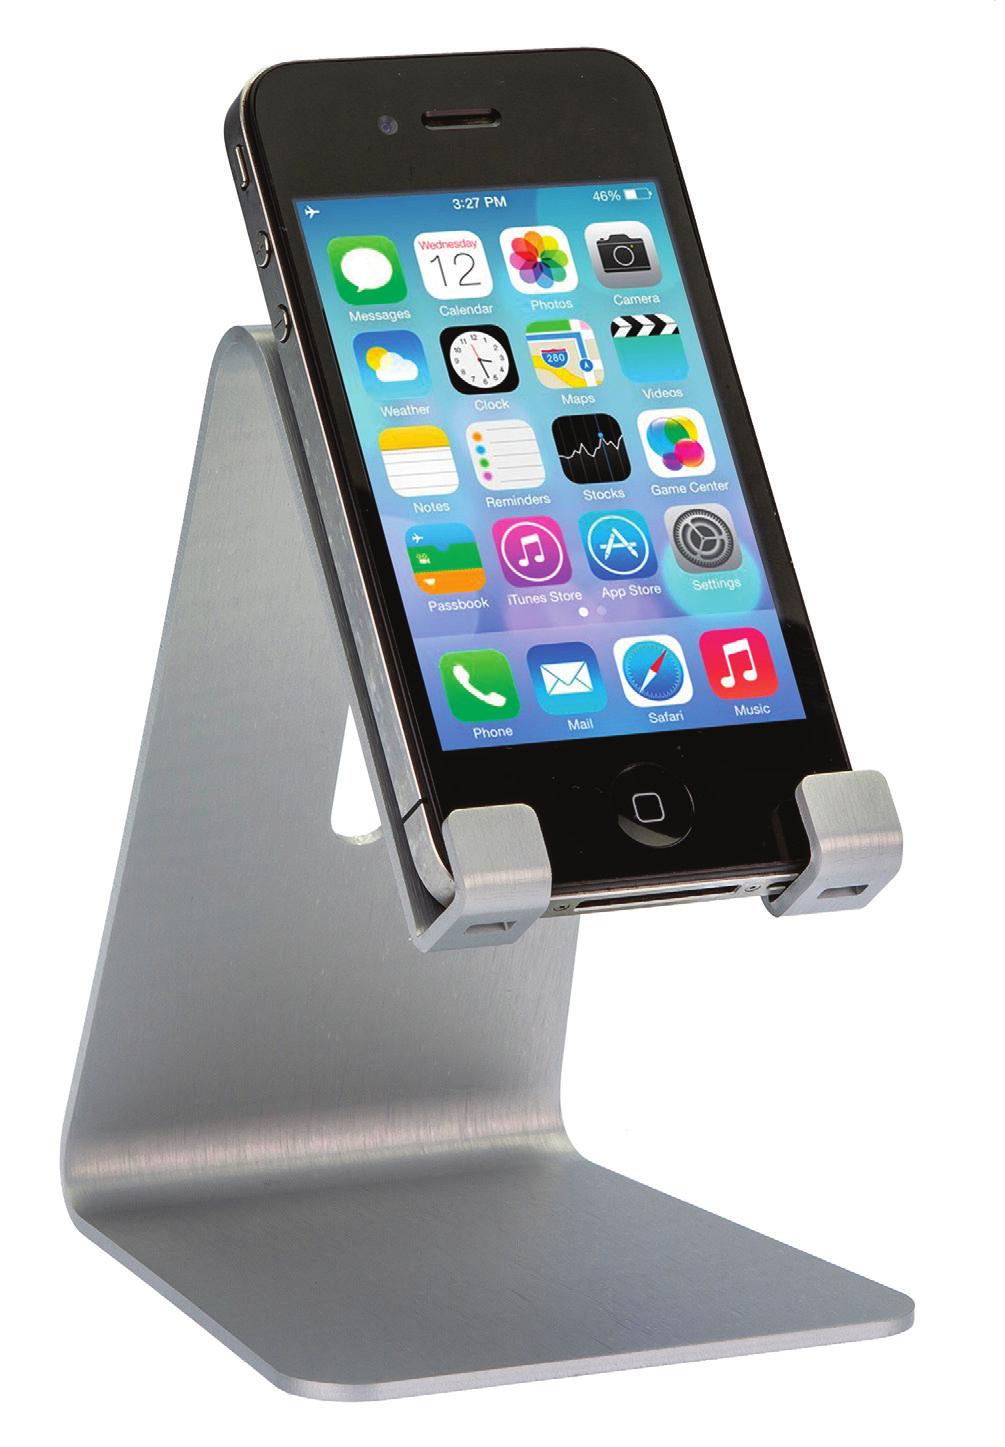 iphone FOR DESKTOP DISPLAY PRODUCT CODE 7635 11 Designed to compliment the aesthetic of the iphone, this tough stand is robust, being manufactured from 3mm aircraft grade aluminum.